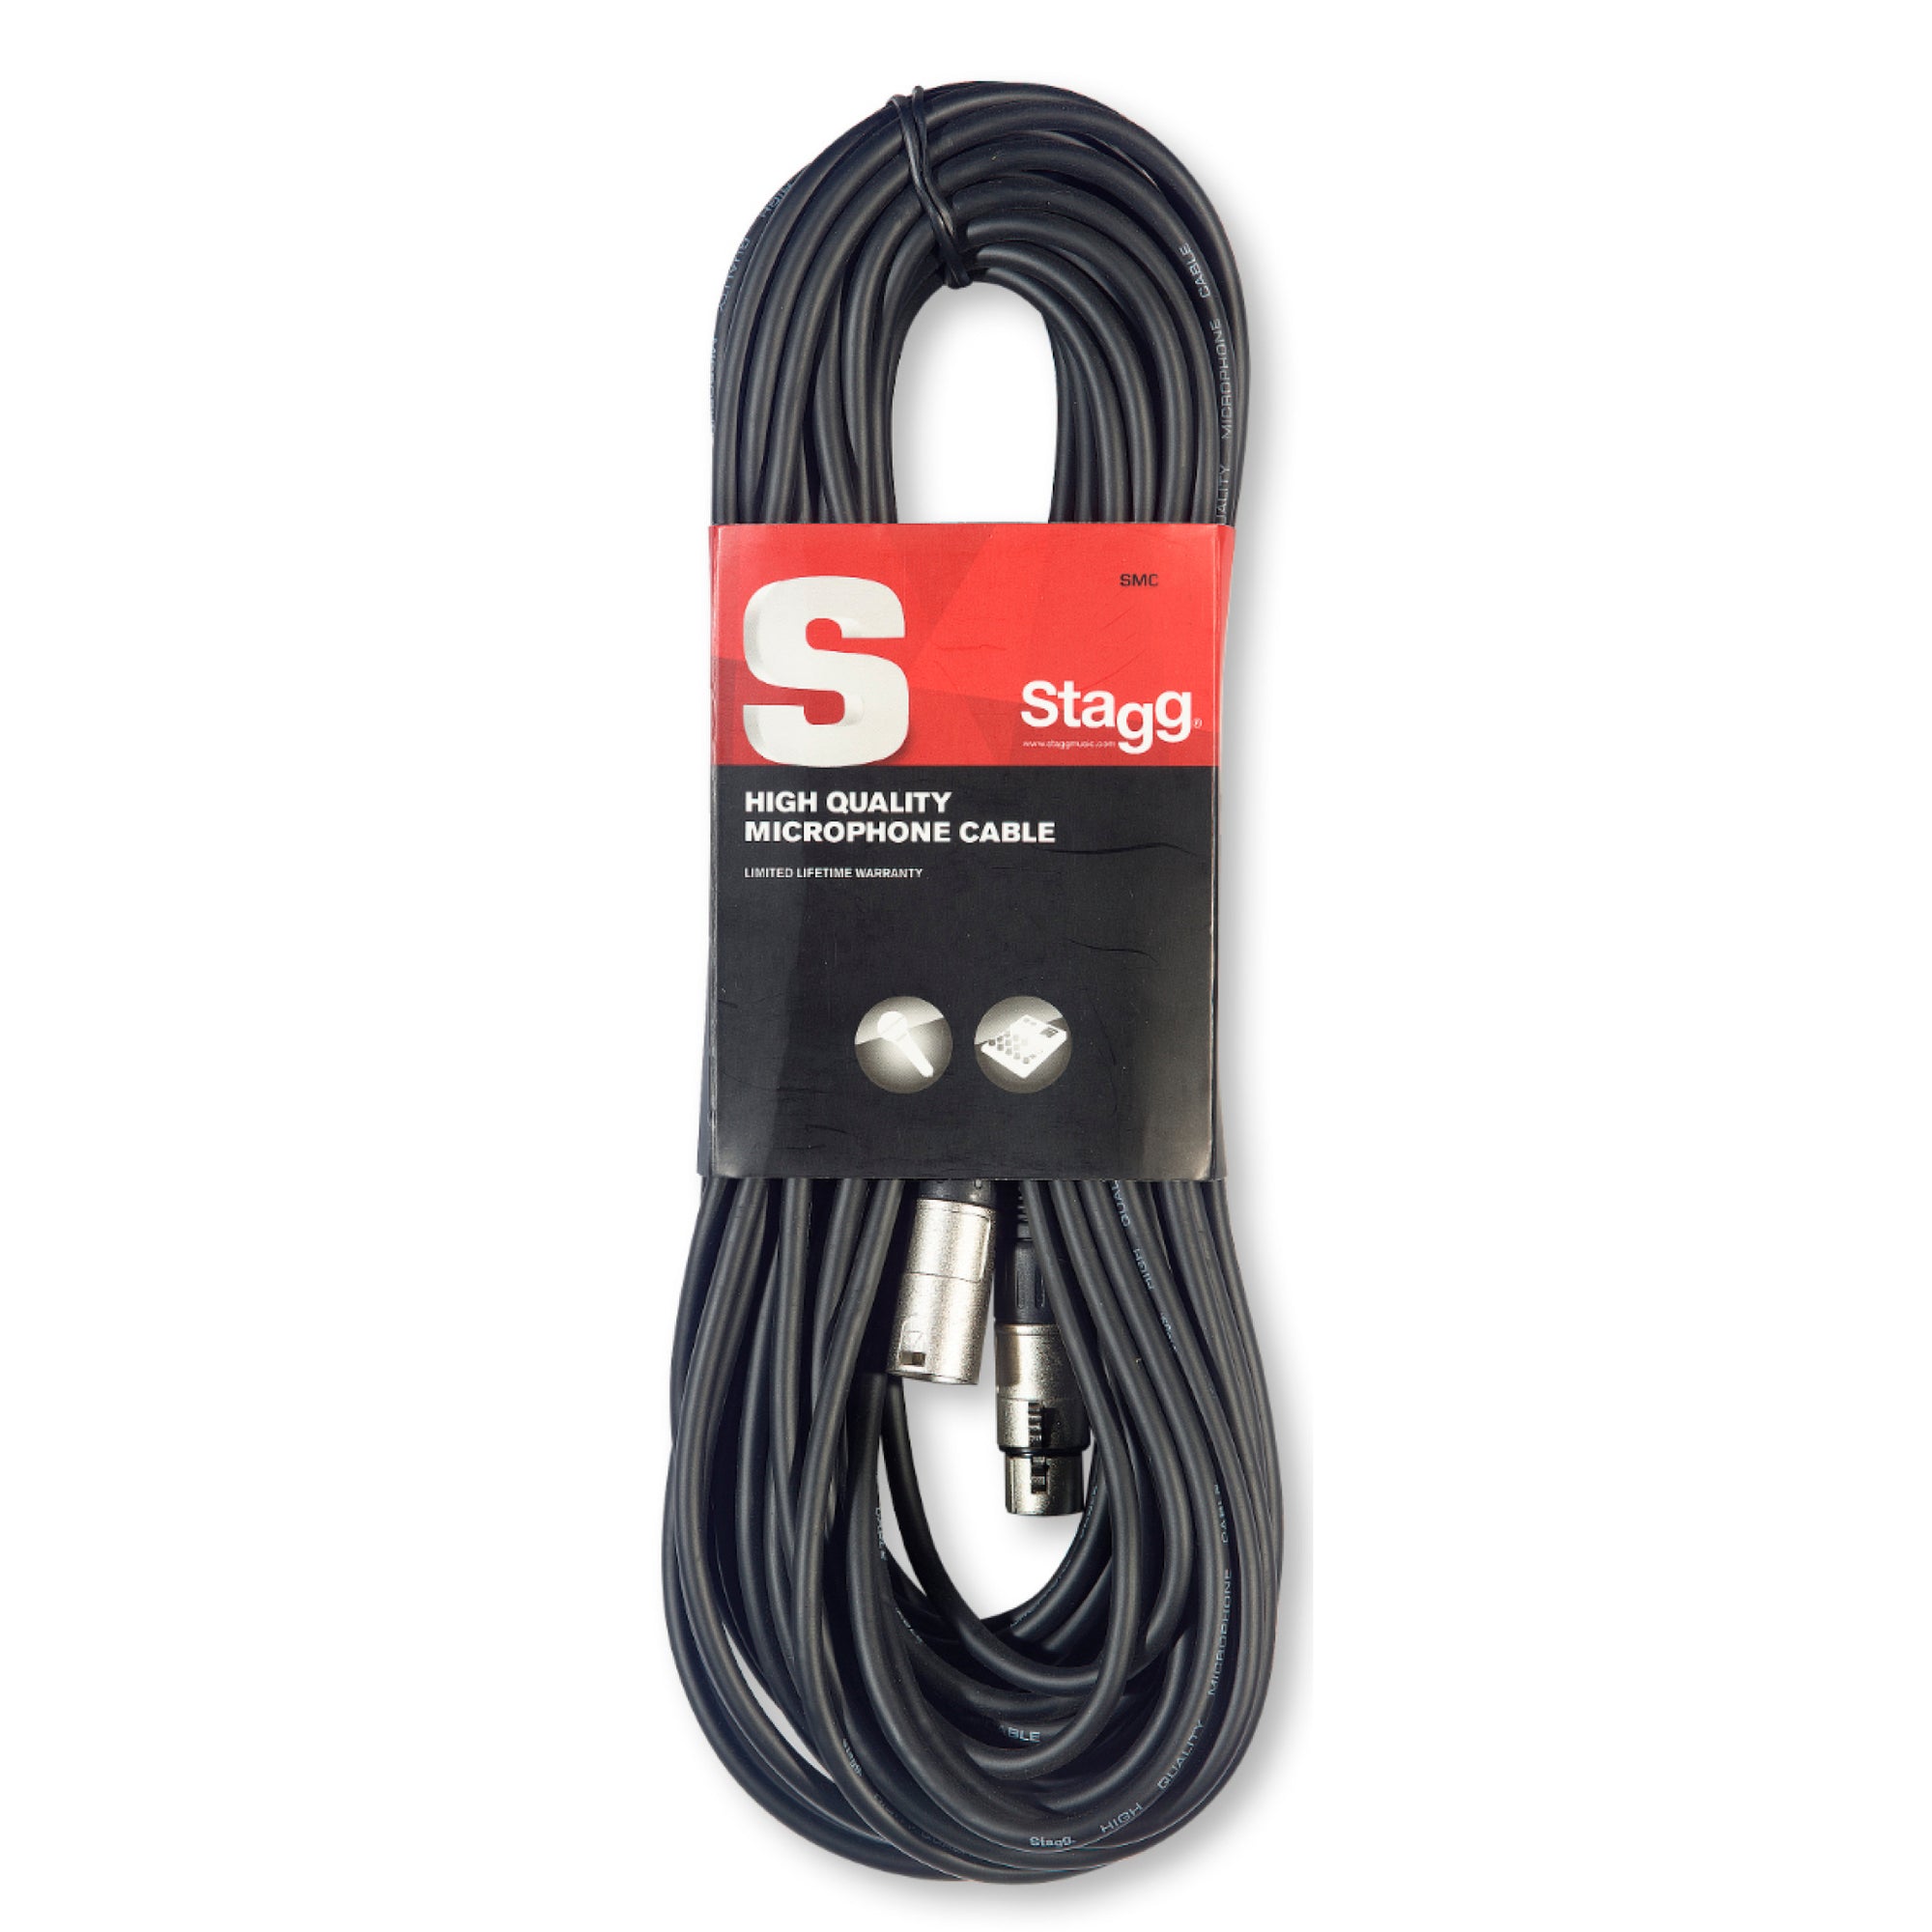 Stagg SMC15 50ft XLR Microphone Cable SMC15